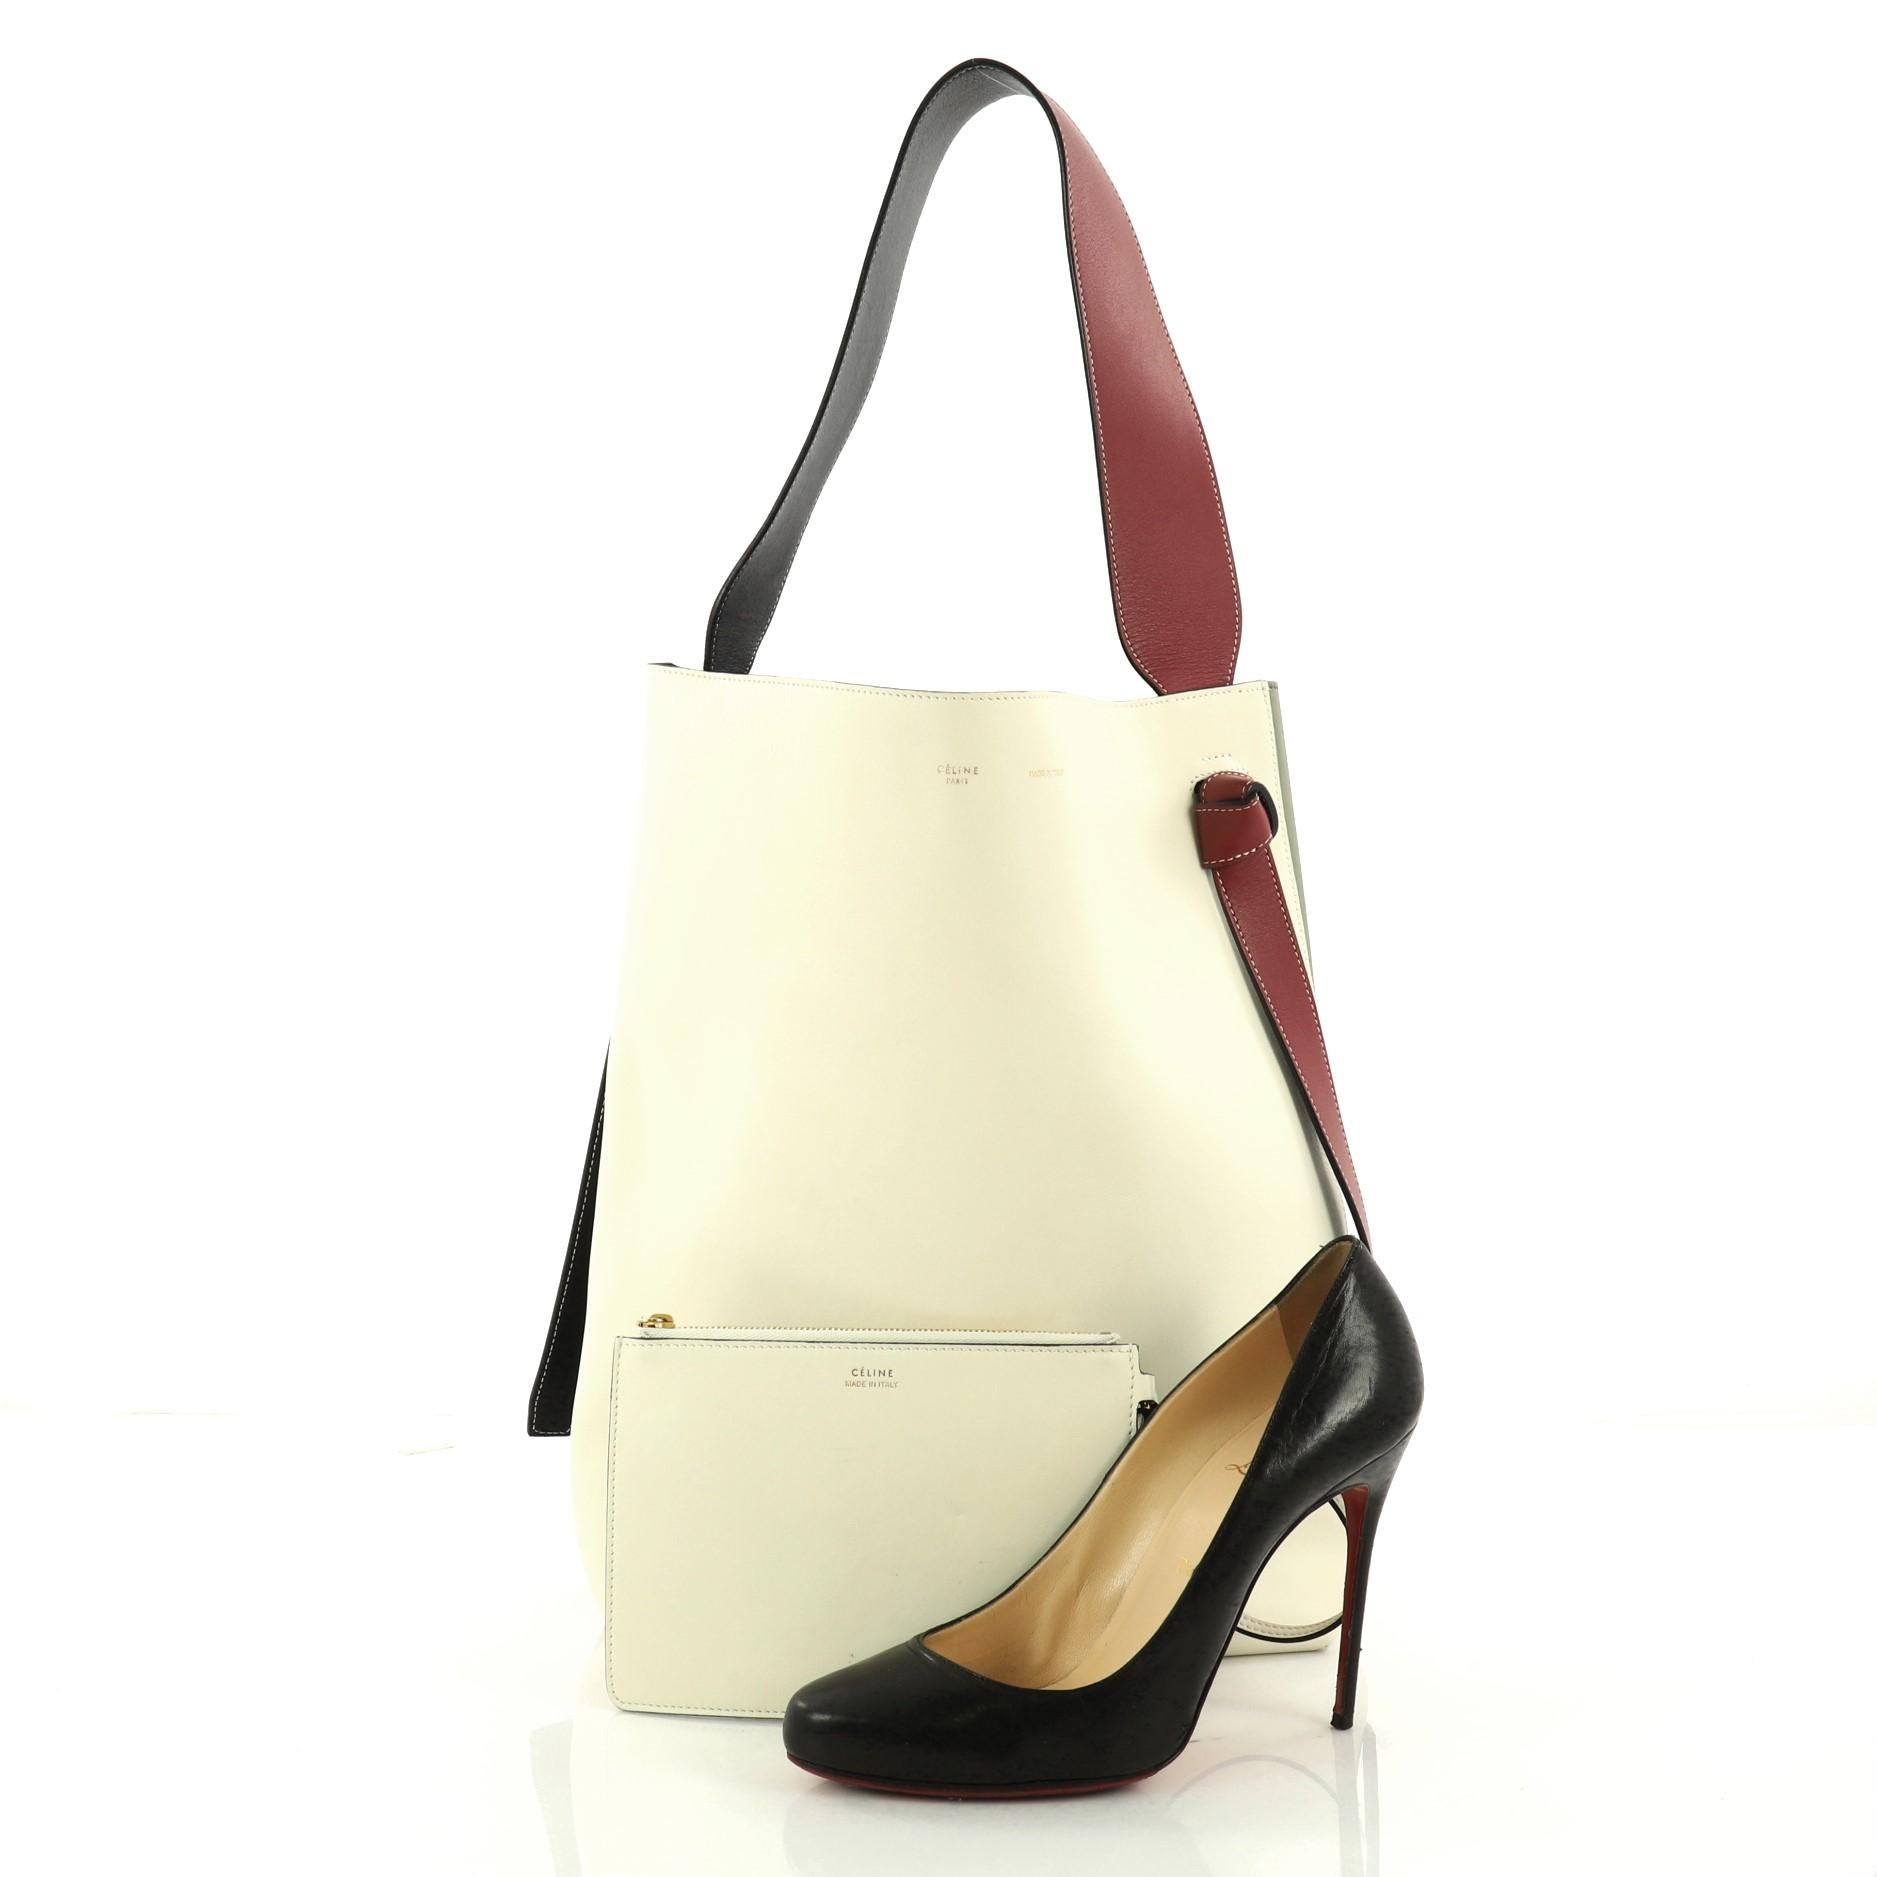 This authentic Celine Twisted Cabas Tote Calfskin Small is a youthful accessory made for everyday excursions. Crafted from off white, green, and red calfskin leather, this fresh tote features red and black leather looping shoulder strap with knot